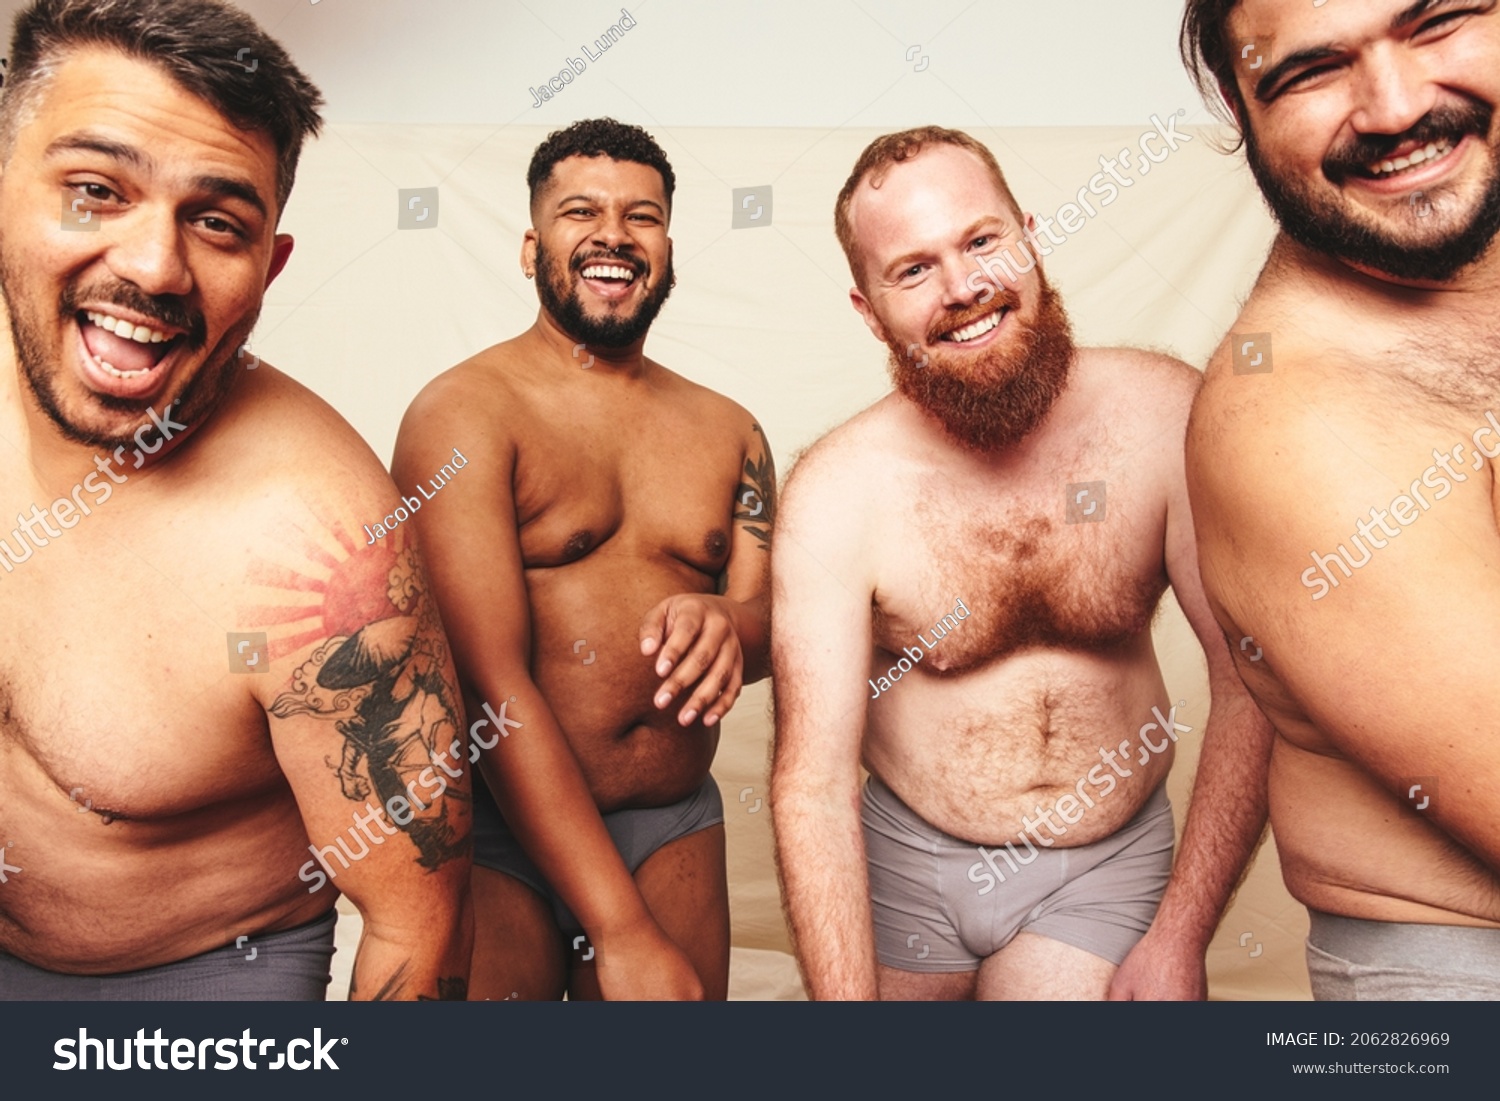 Having fun while shirtless. Three happy men smiling at the camera while wearing underwear in a studio. Body positive and self-confident men celebrating their natural bodies. #2062826969